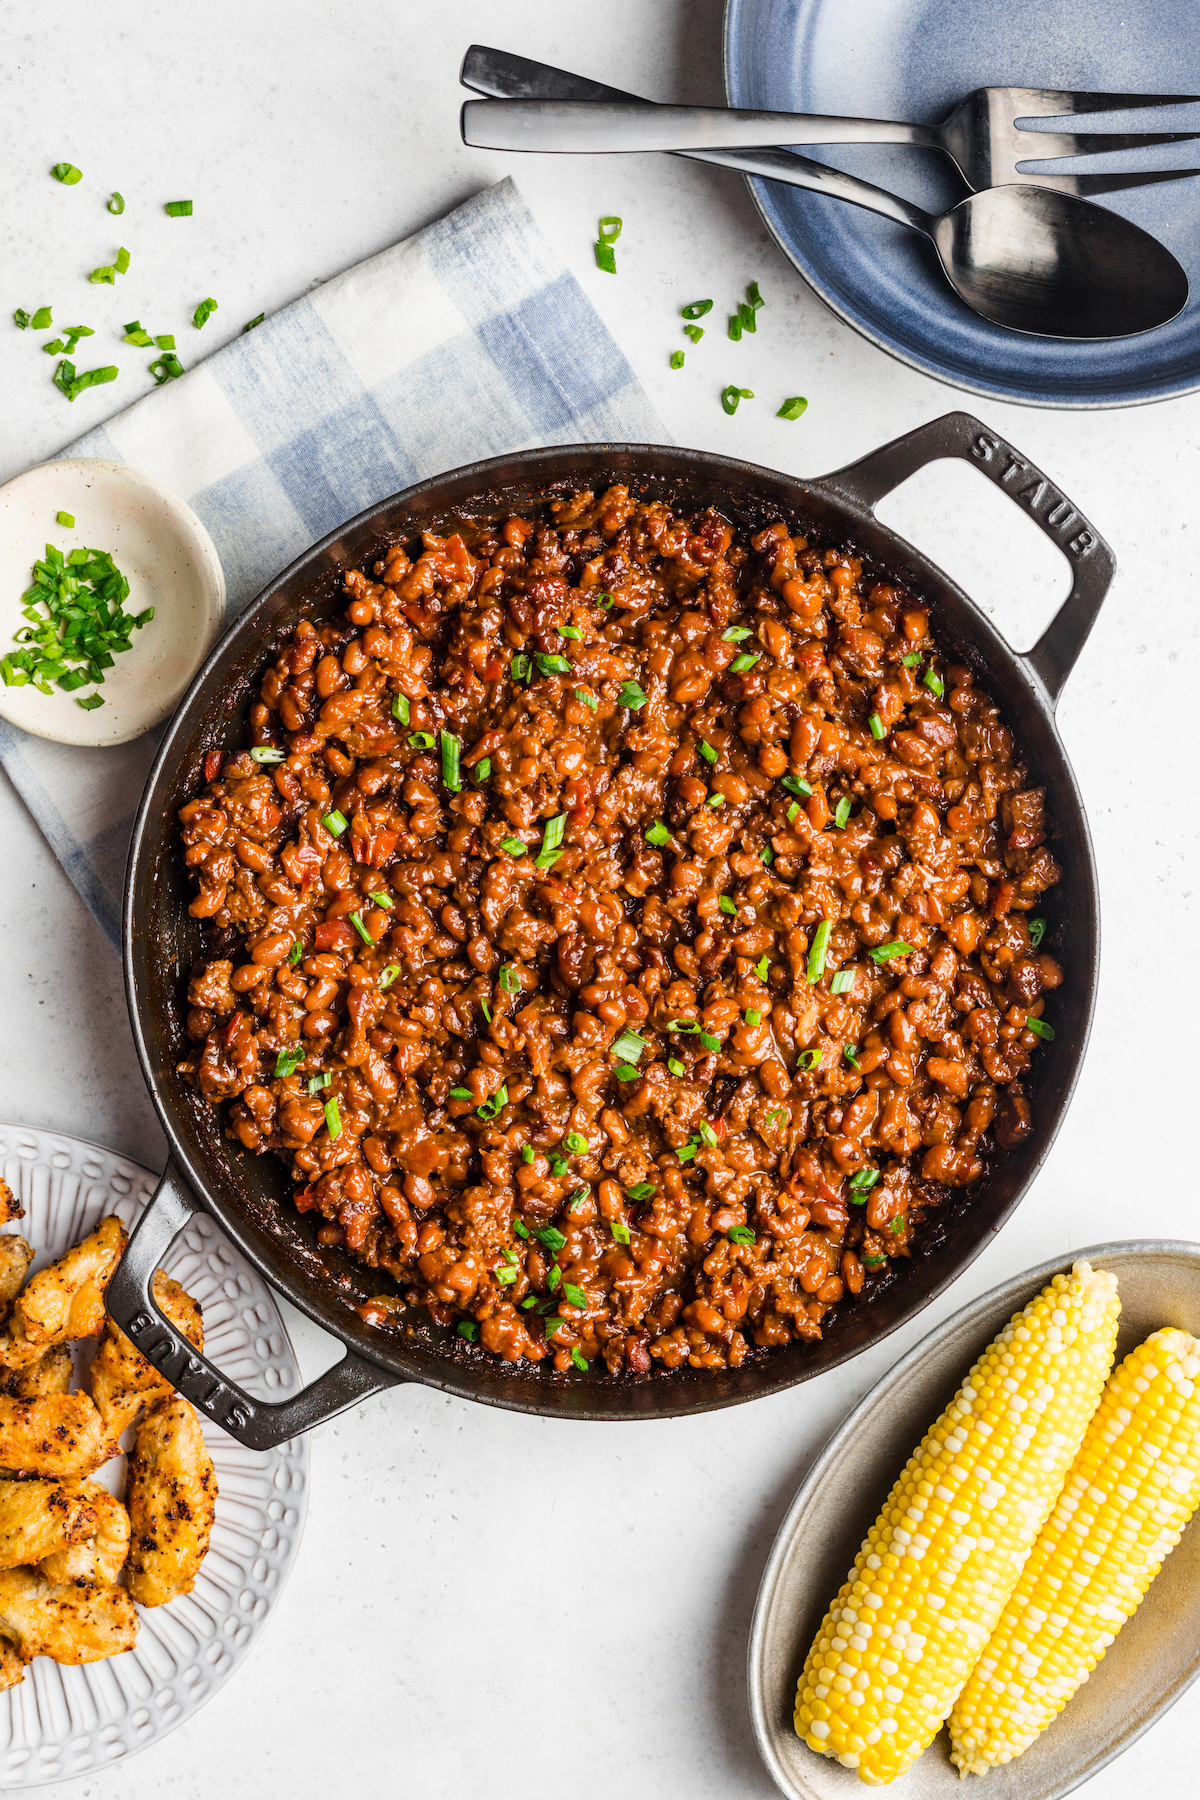 A double-handled skillet of baked beans on a table with ears of corn on the cob and other dishes.